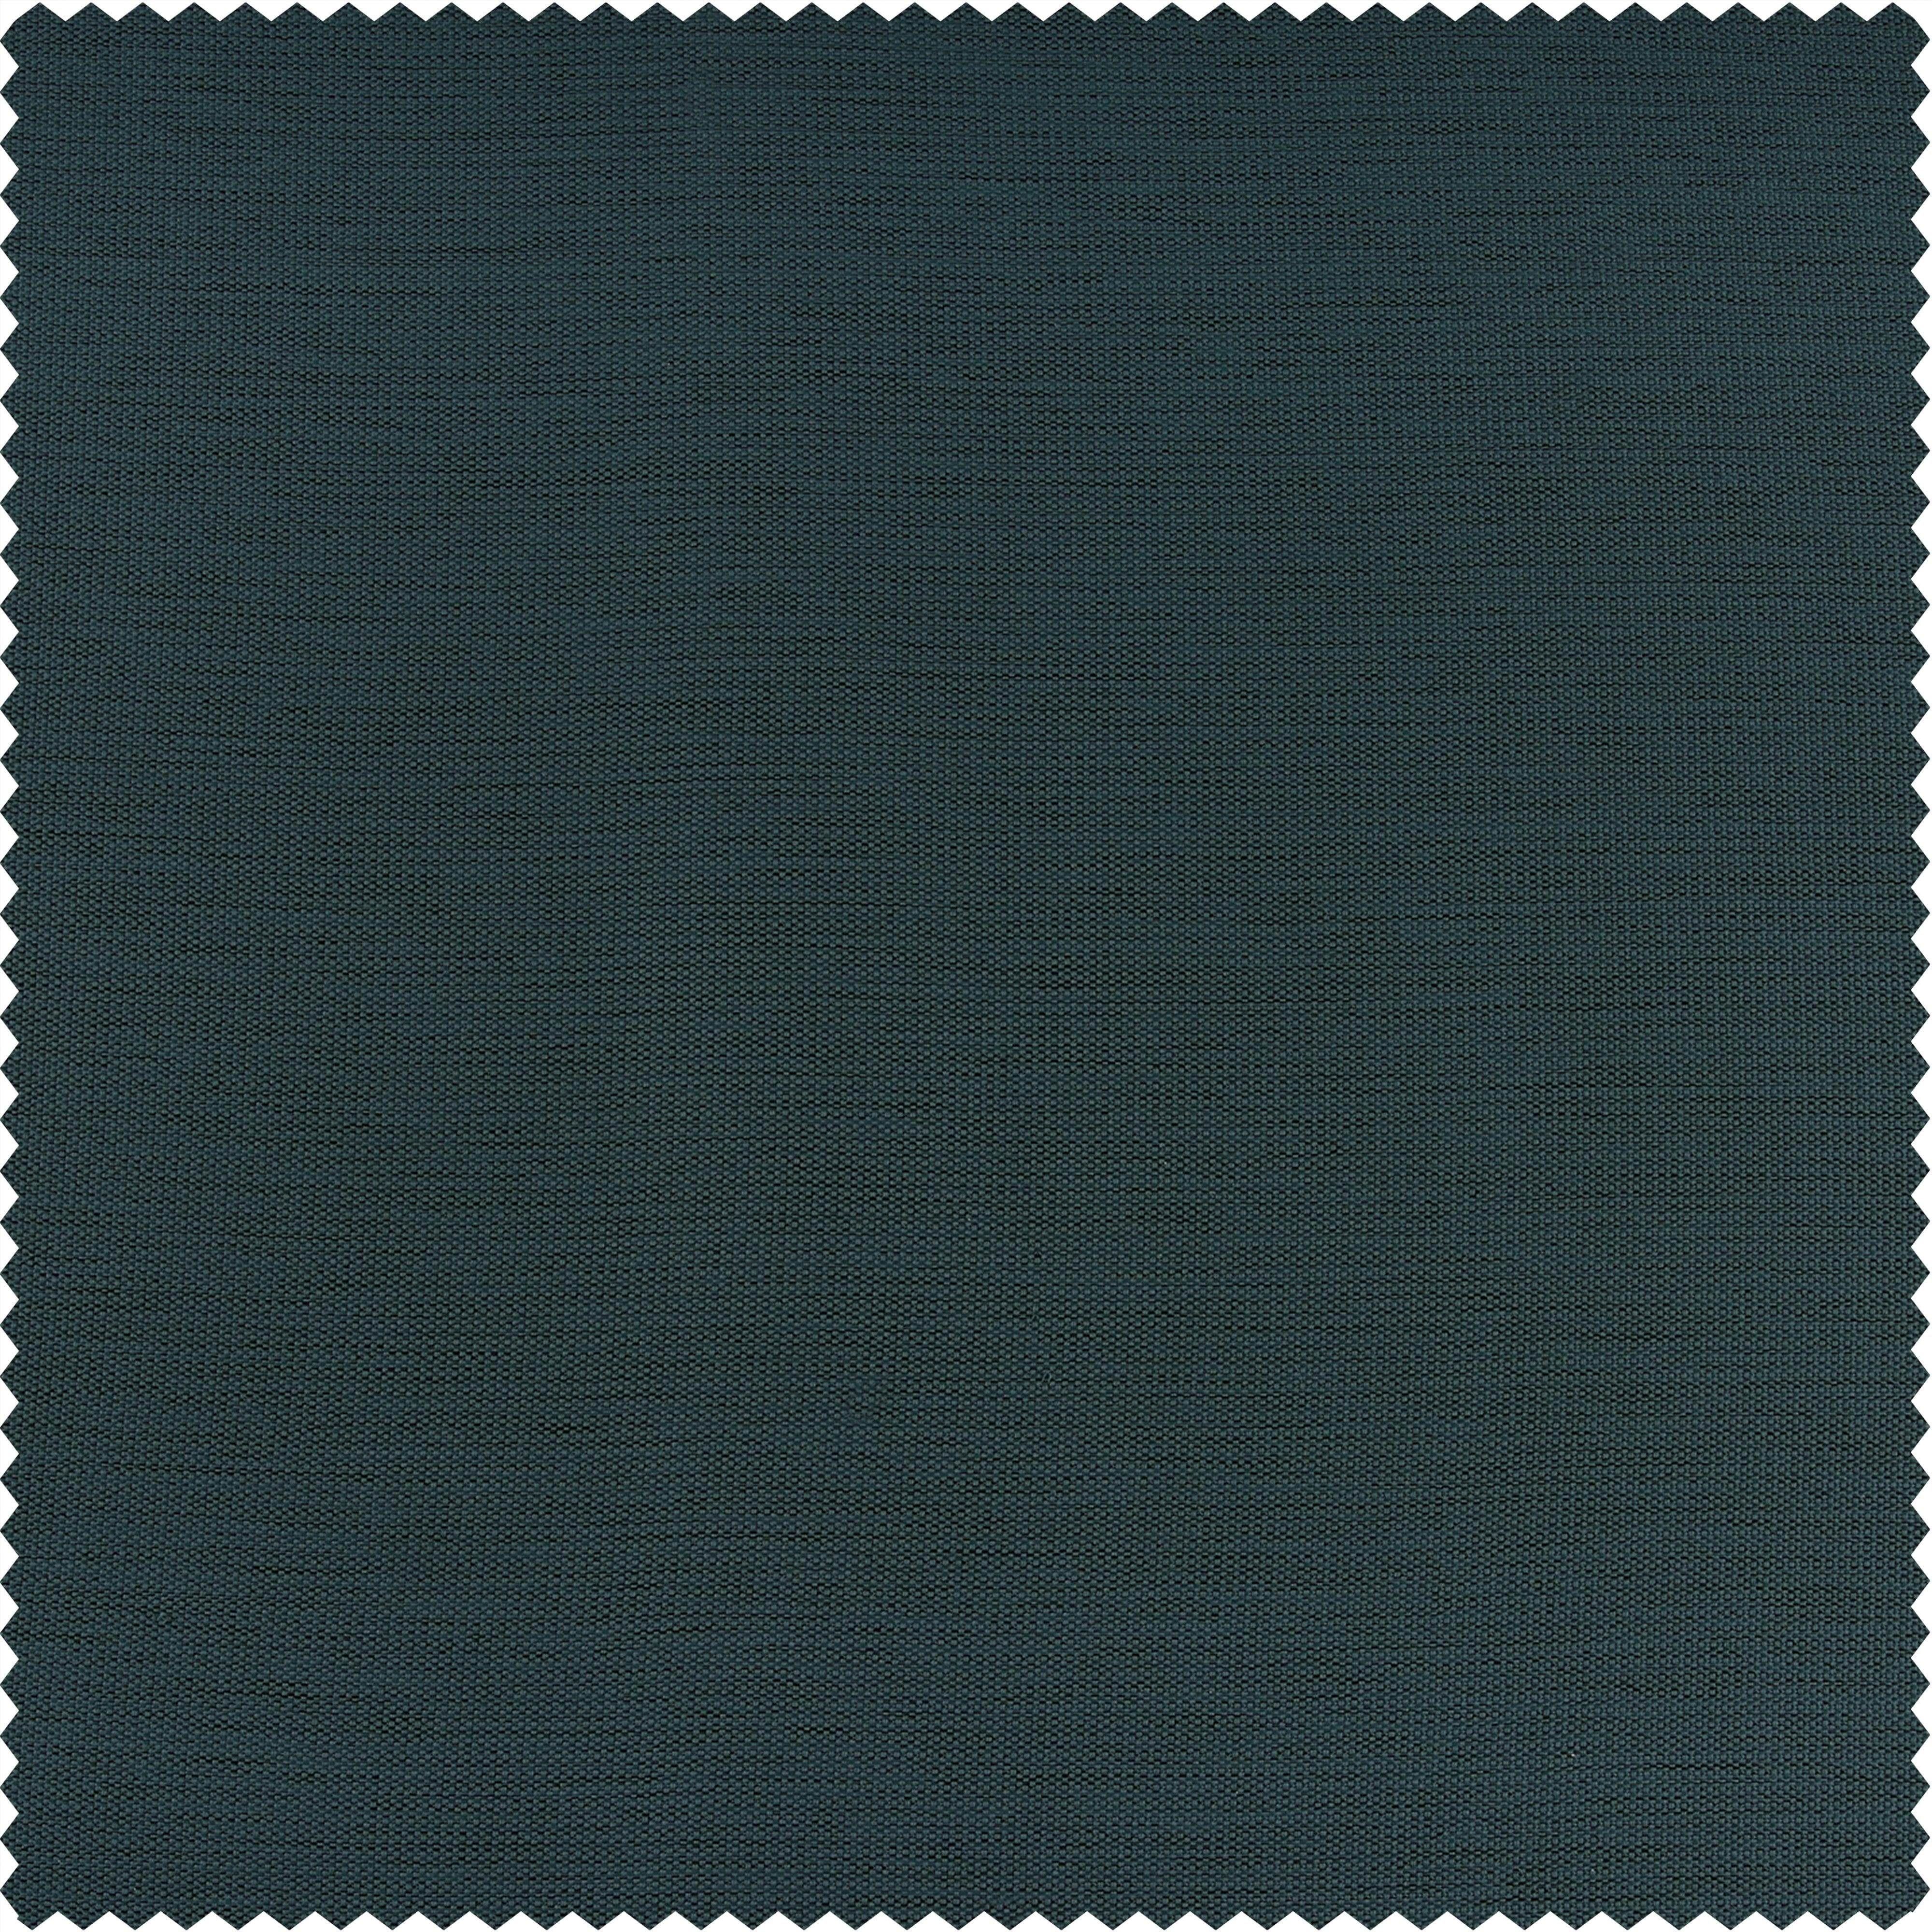 Bayberry Teal Green Textured Bellino Swatch